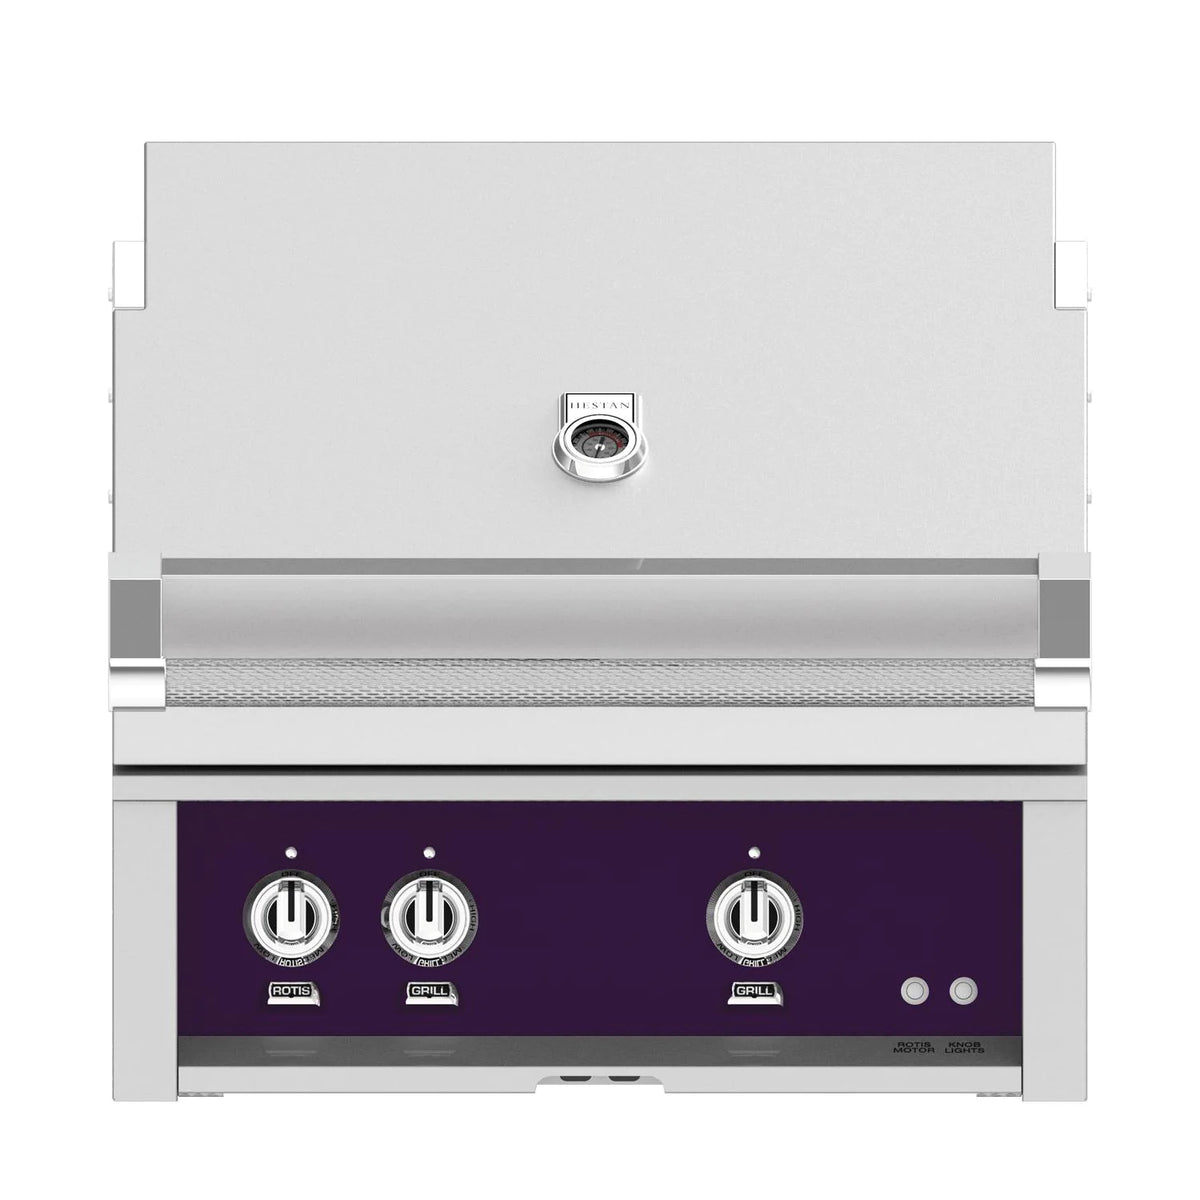 Hestan 30-Inch Built-In Gas Grill with All Infrared Burners and Rotisserie in Purple Color